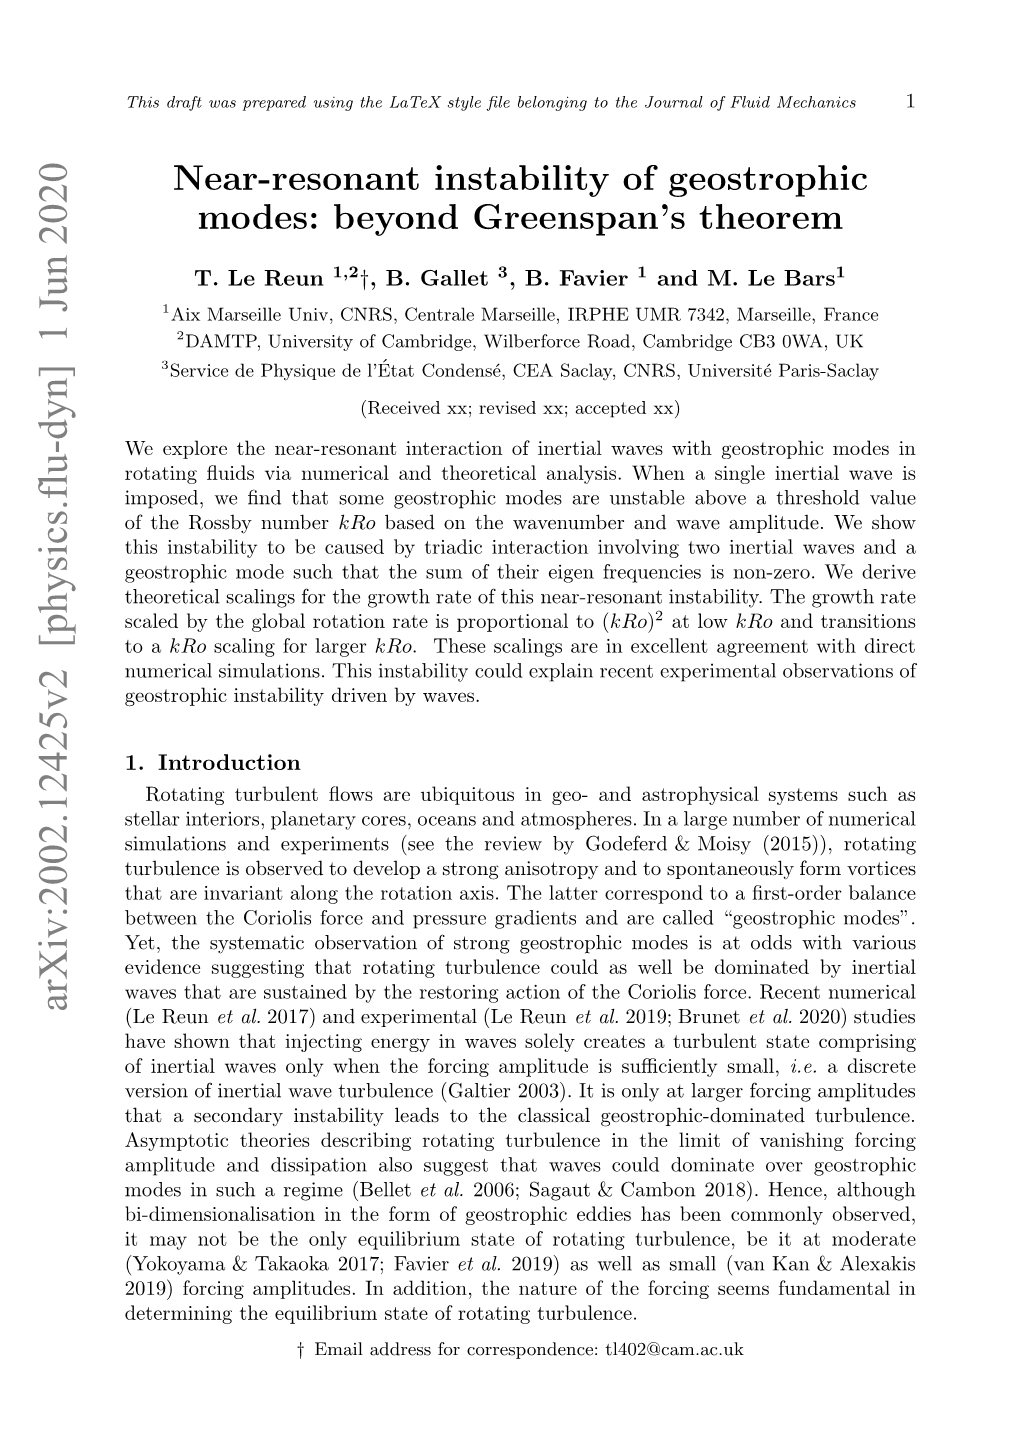 Near-Resonant Instability of Geostrophic Modes 3 (A) Ro = 2.83 × 10−3 (B) Ro = 2.83 × 10−3 (C) Ro = 2.83 × 10−2 (D) Ro = 2.83 × 10−2